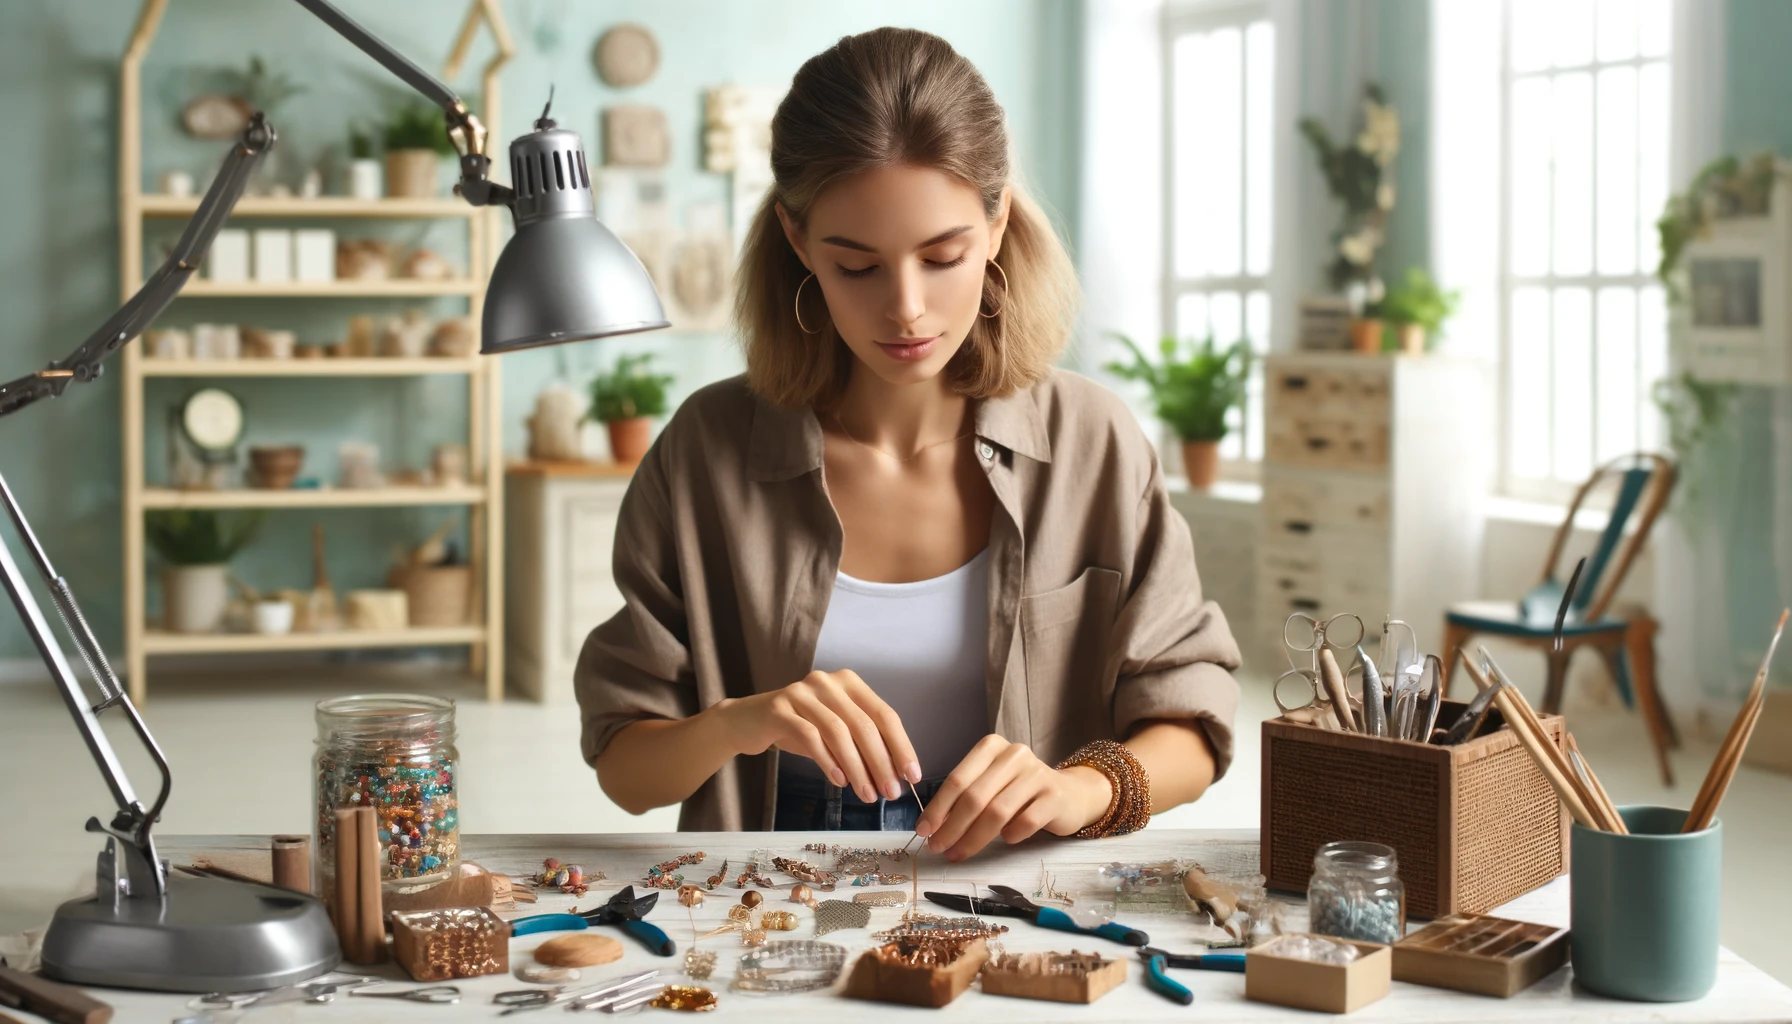 A realistic photograph of a woman creating handmade jewelry at a craft table. The woman is focused, with tools and materials like beads, wires, and pliers spread out on the table. The background includes a bright and tidy workspace with decorative elements and plants.